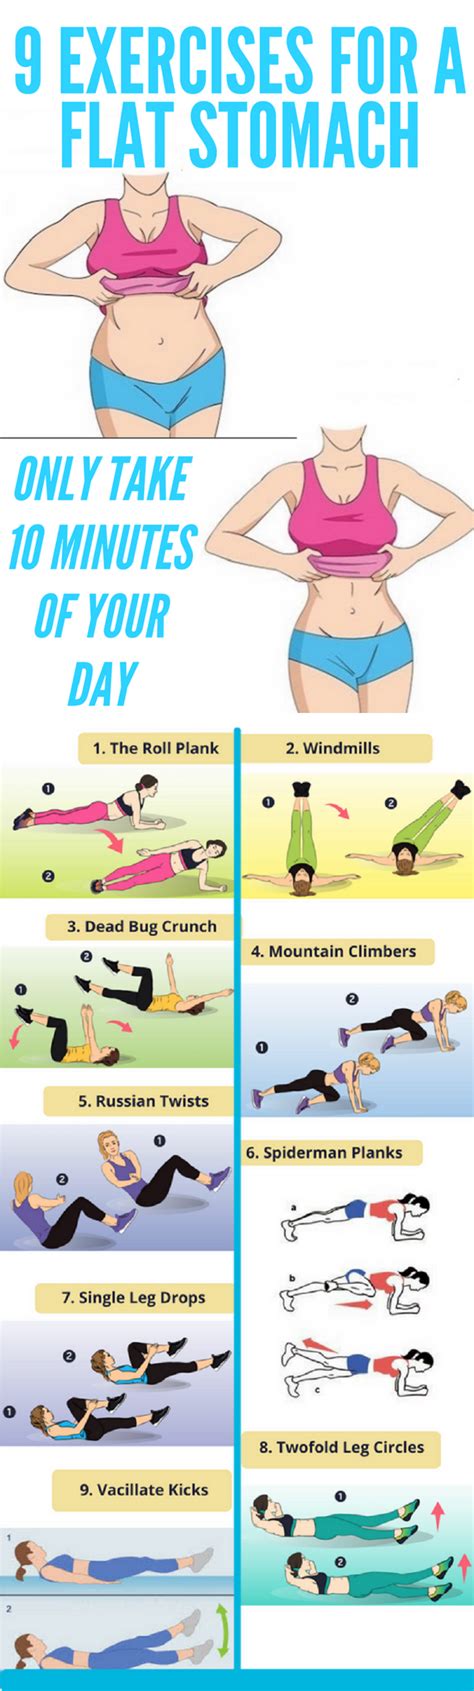 9 Exercises For A Flat Stomach Only Take 10 Minutes Of Your Day